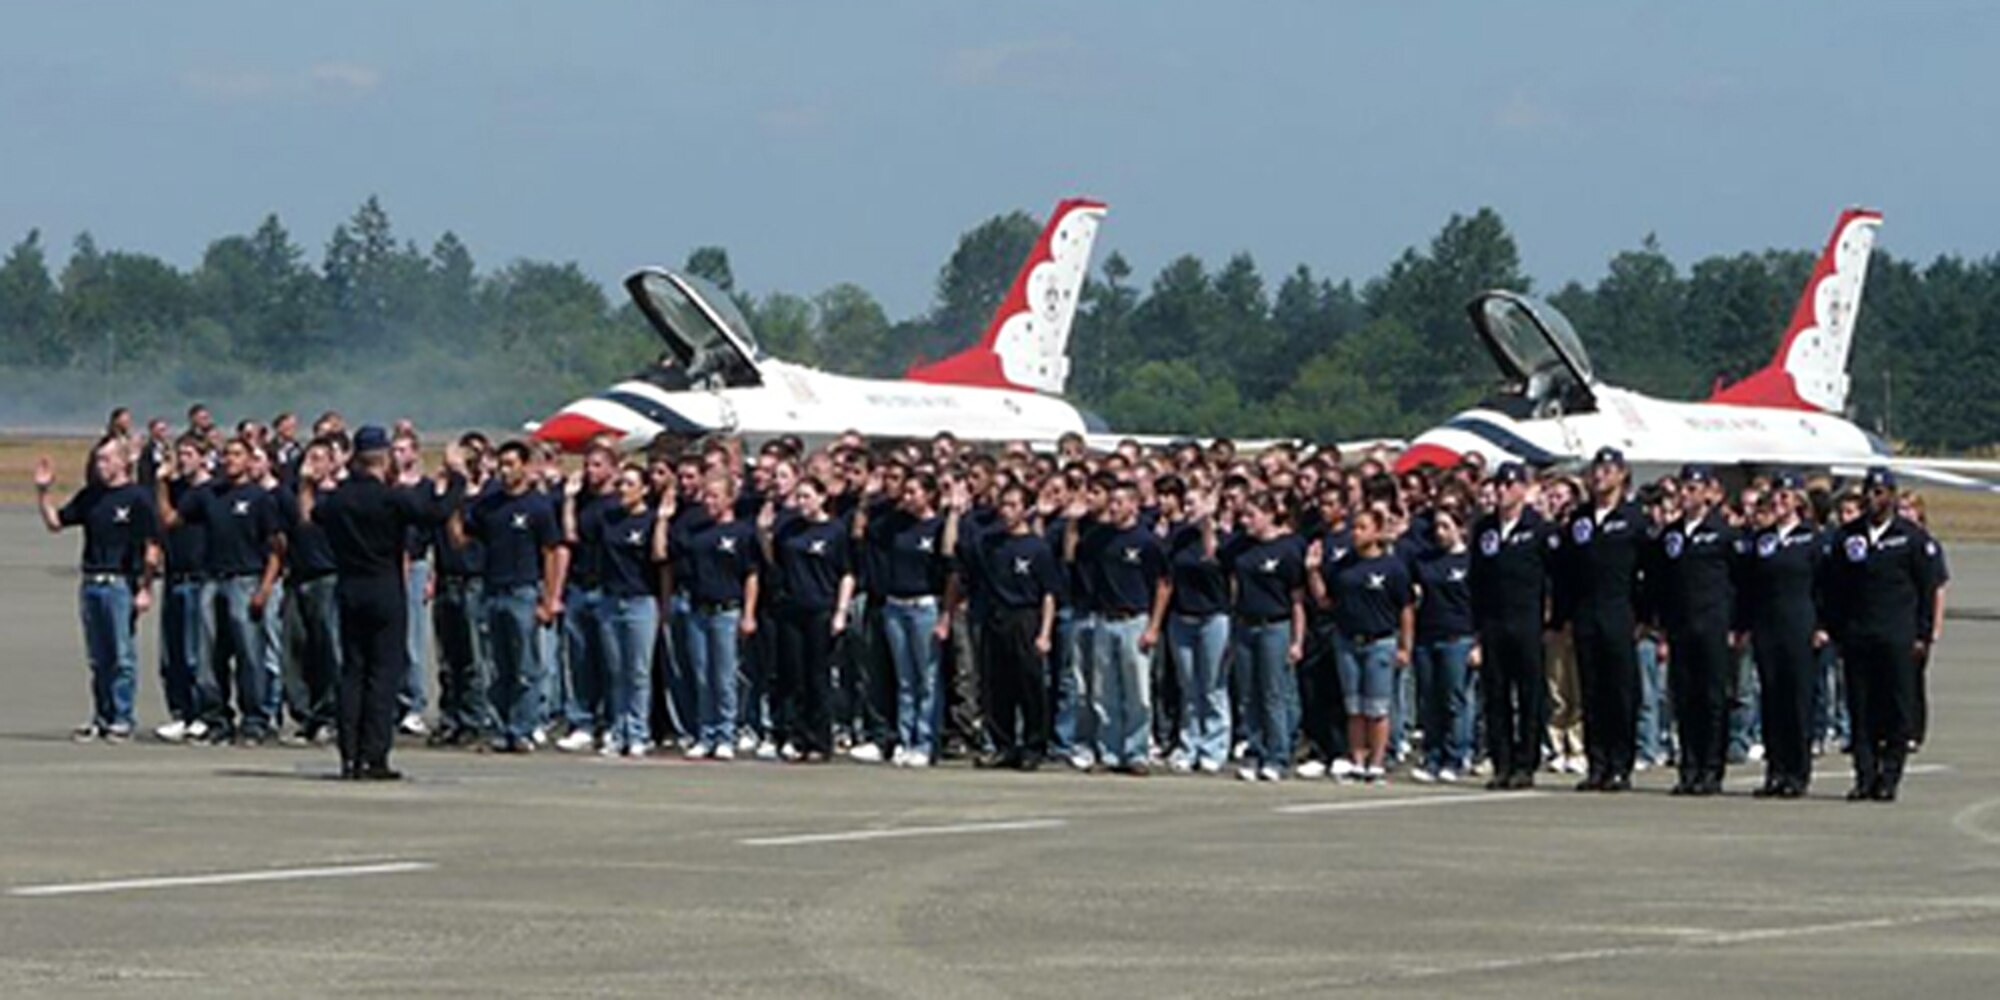 Lt. Col. Greg Thomas, U.S. Air Force Thunderbirds commander, conducts a public swearing-in ceremony July 19 at the 2008 McChord Air Expo in Washington for 151 future Airmen from the 361st Recruiting Squadron Delayed Entry Program. The ceremony was the largest Air Force DEP swear-in ceremony at an air show. (U.S. Air Force photo)